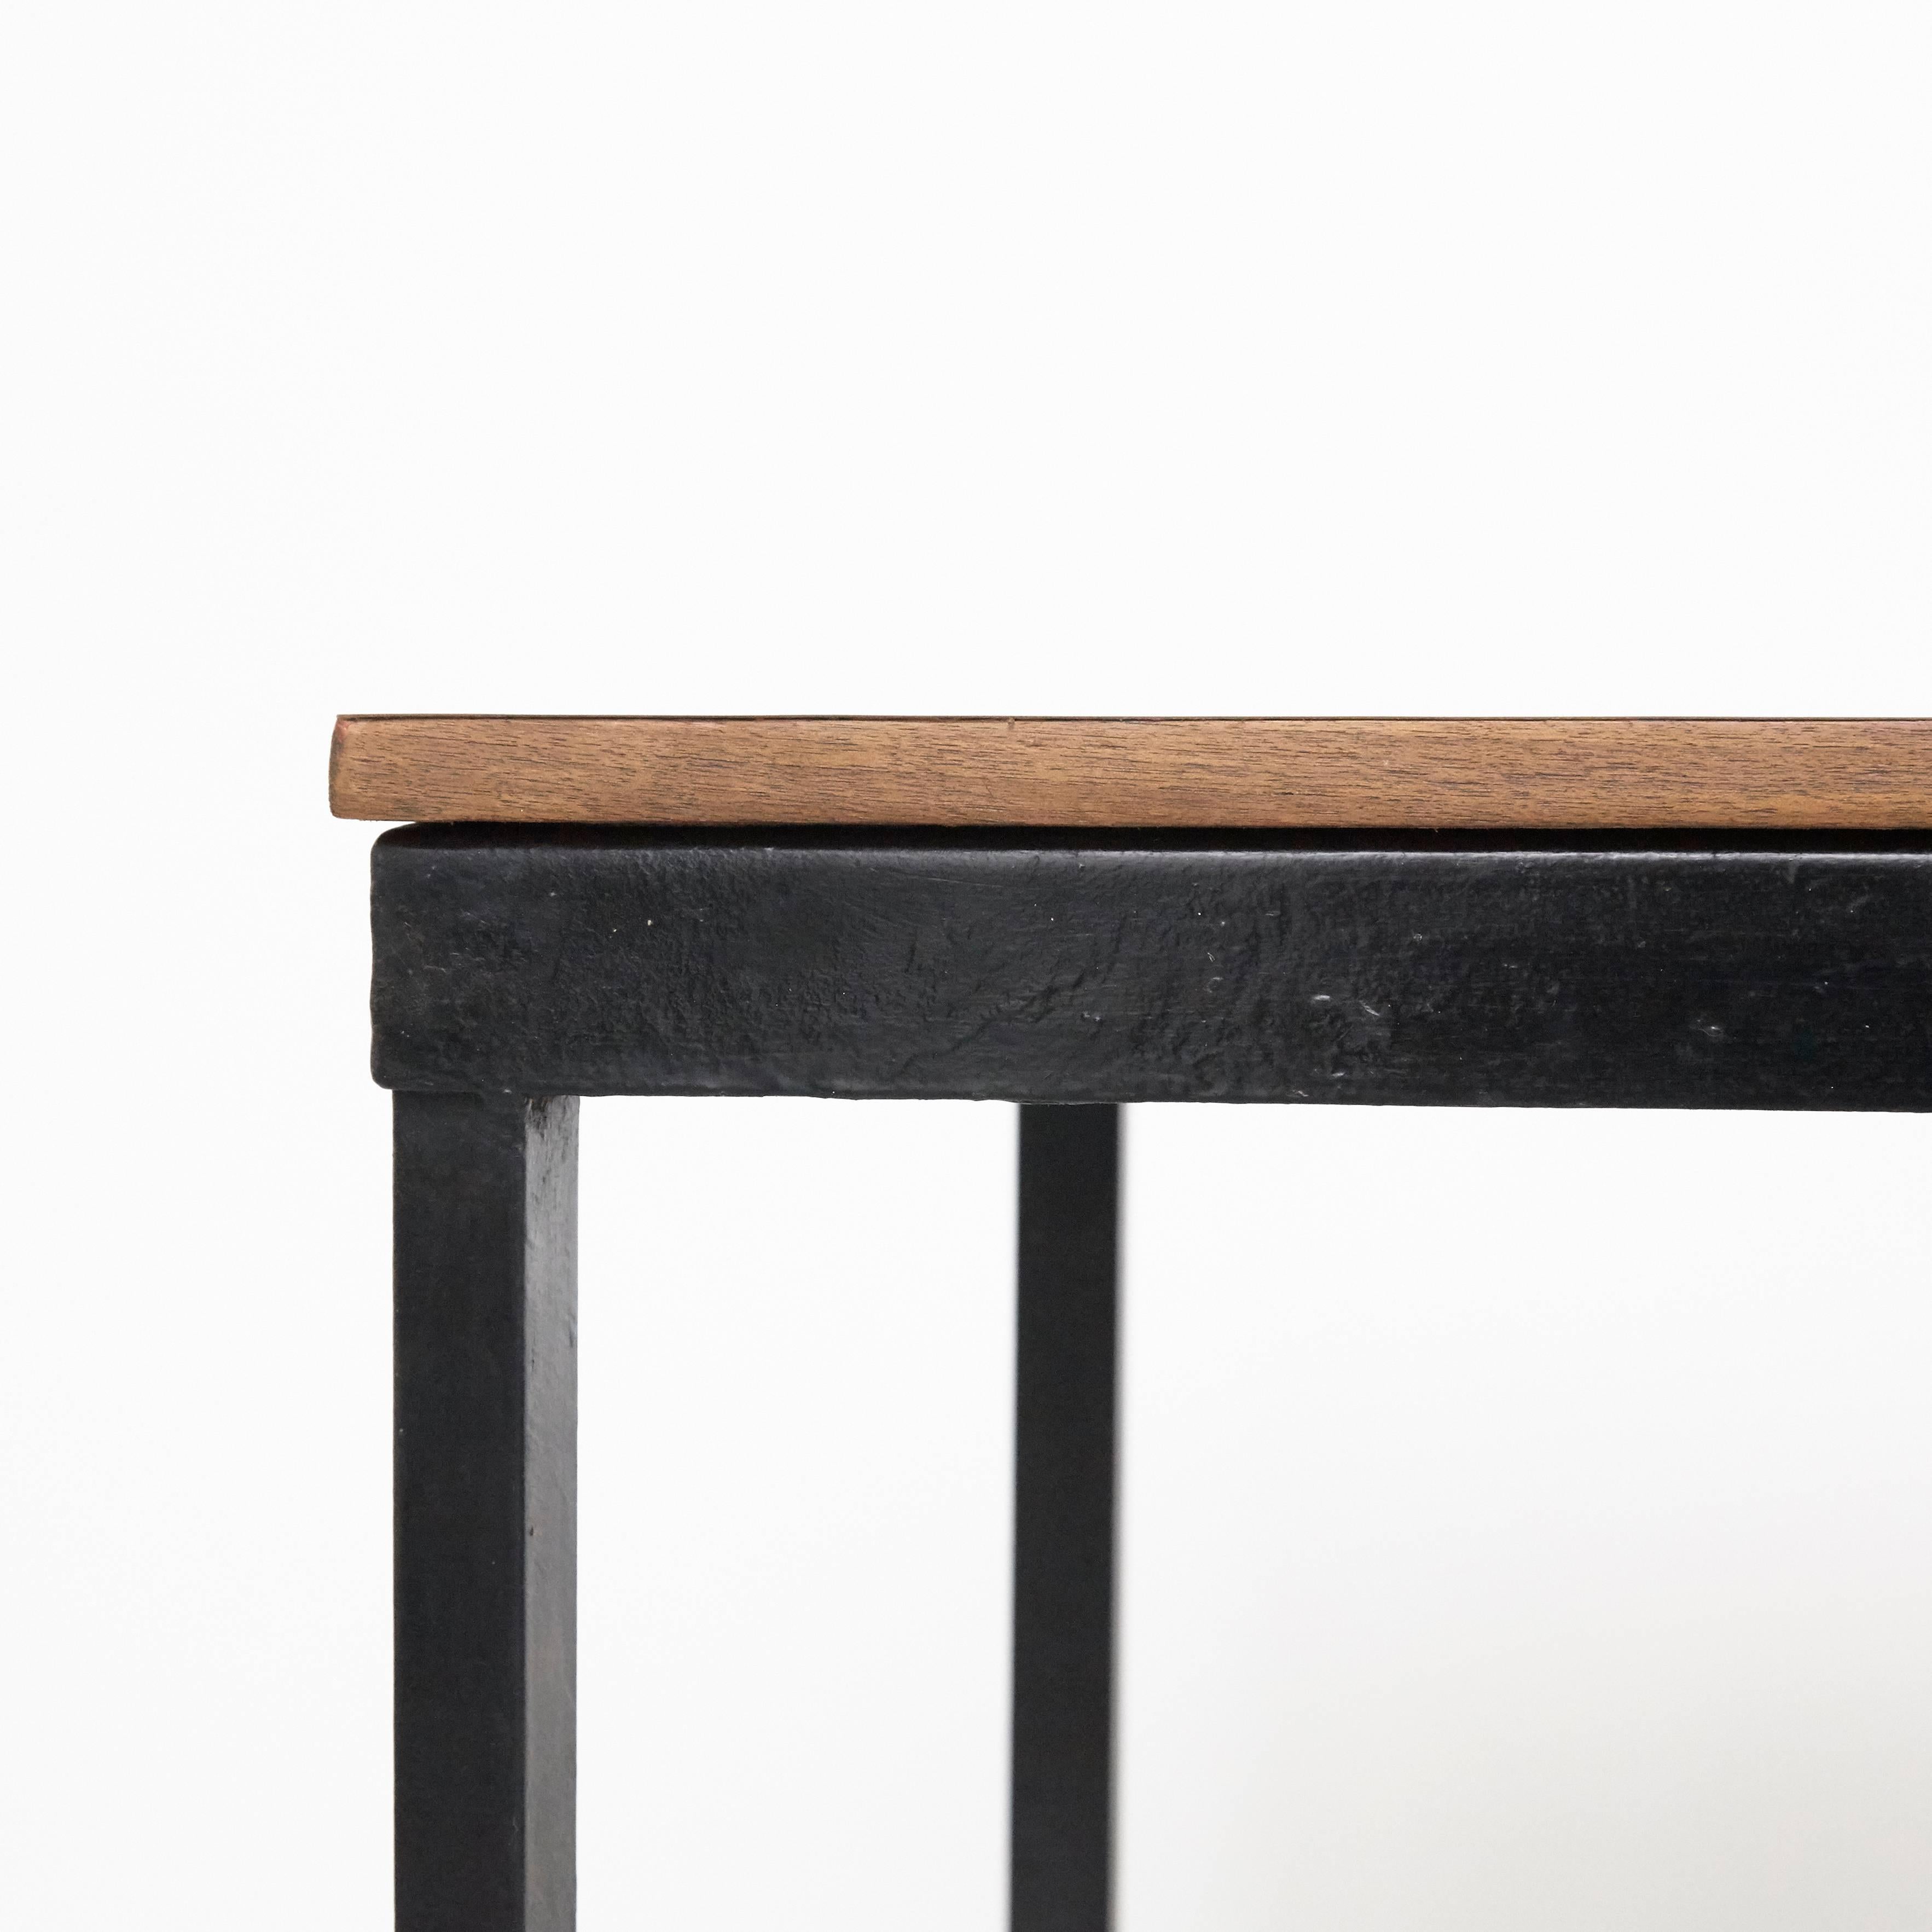 Mid-20th Century Charlotte Perriand Metal, Wood and Formica Bridge Table for Cansado, circa 1950